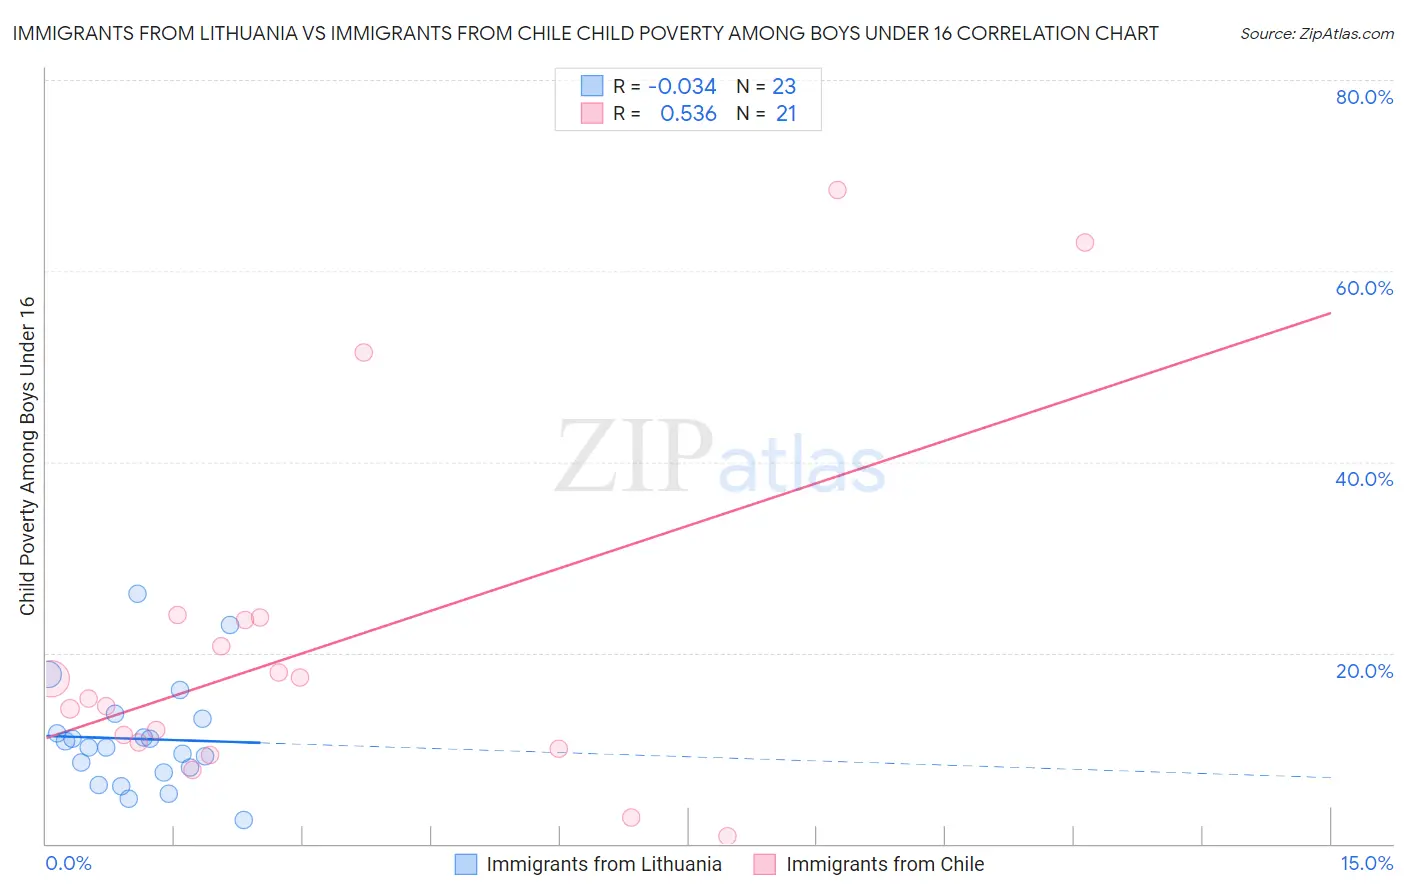 Immigrants from Lithuania vs Immigrants from Chile Child Poverty Among Boys Under 16